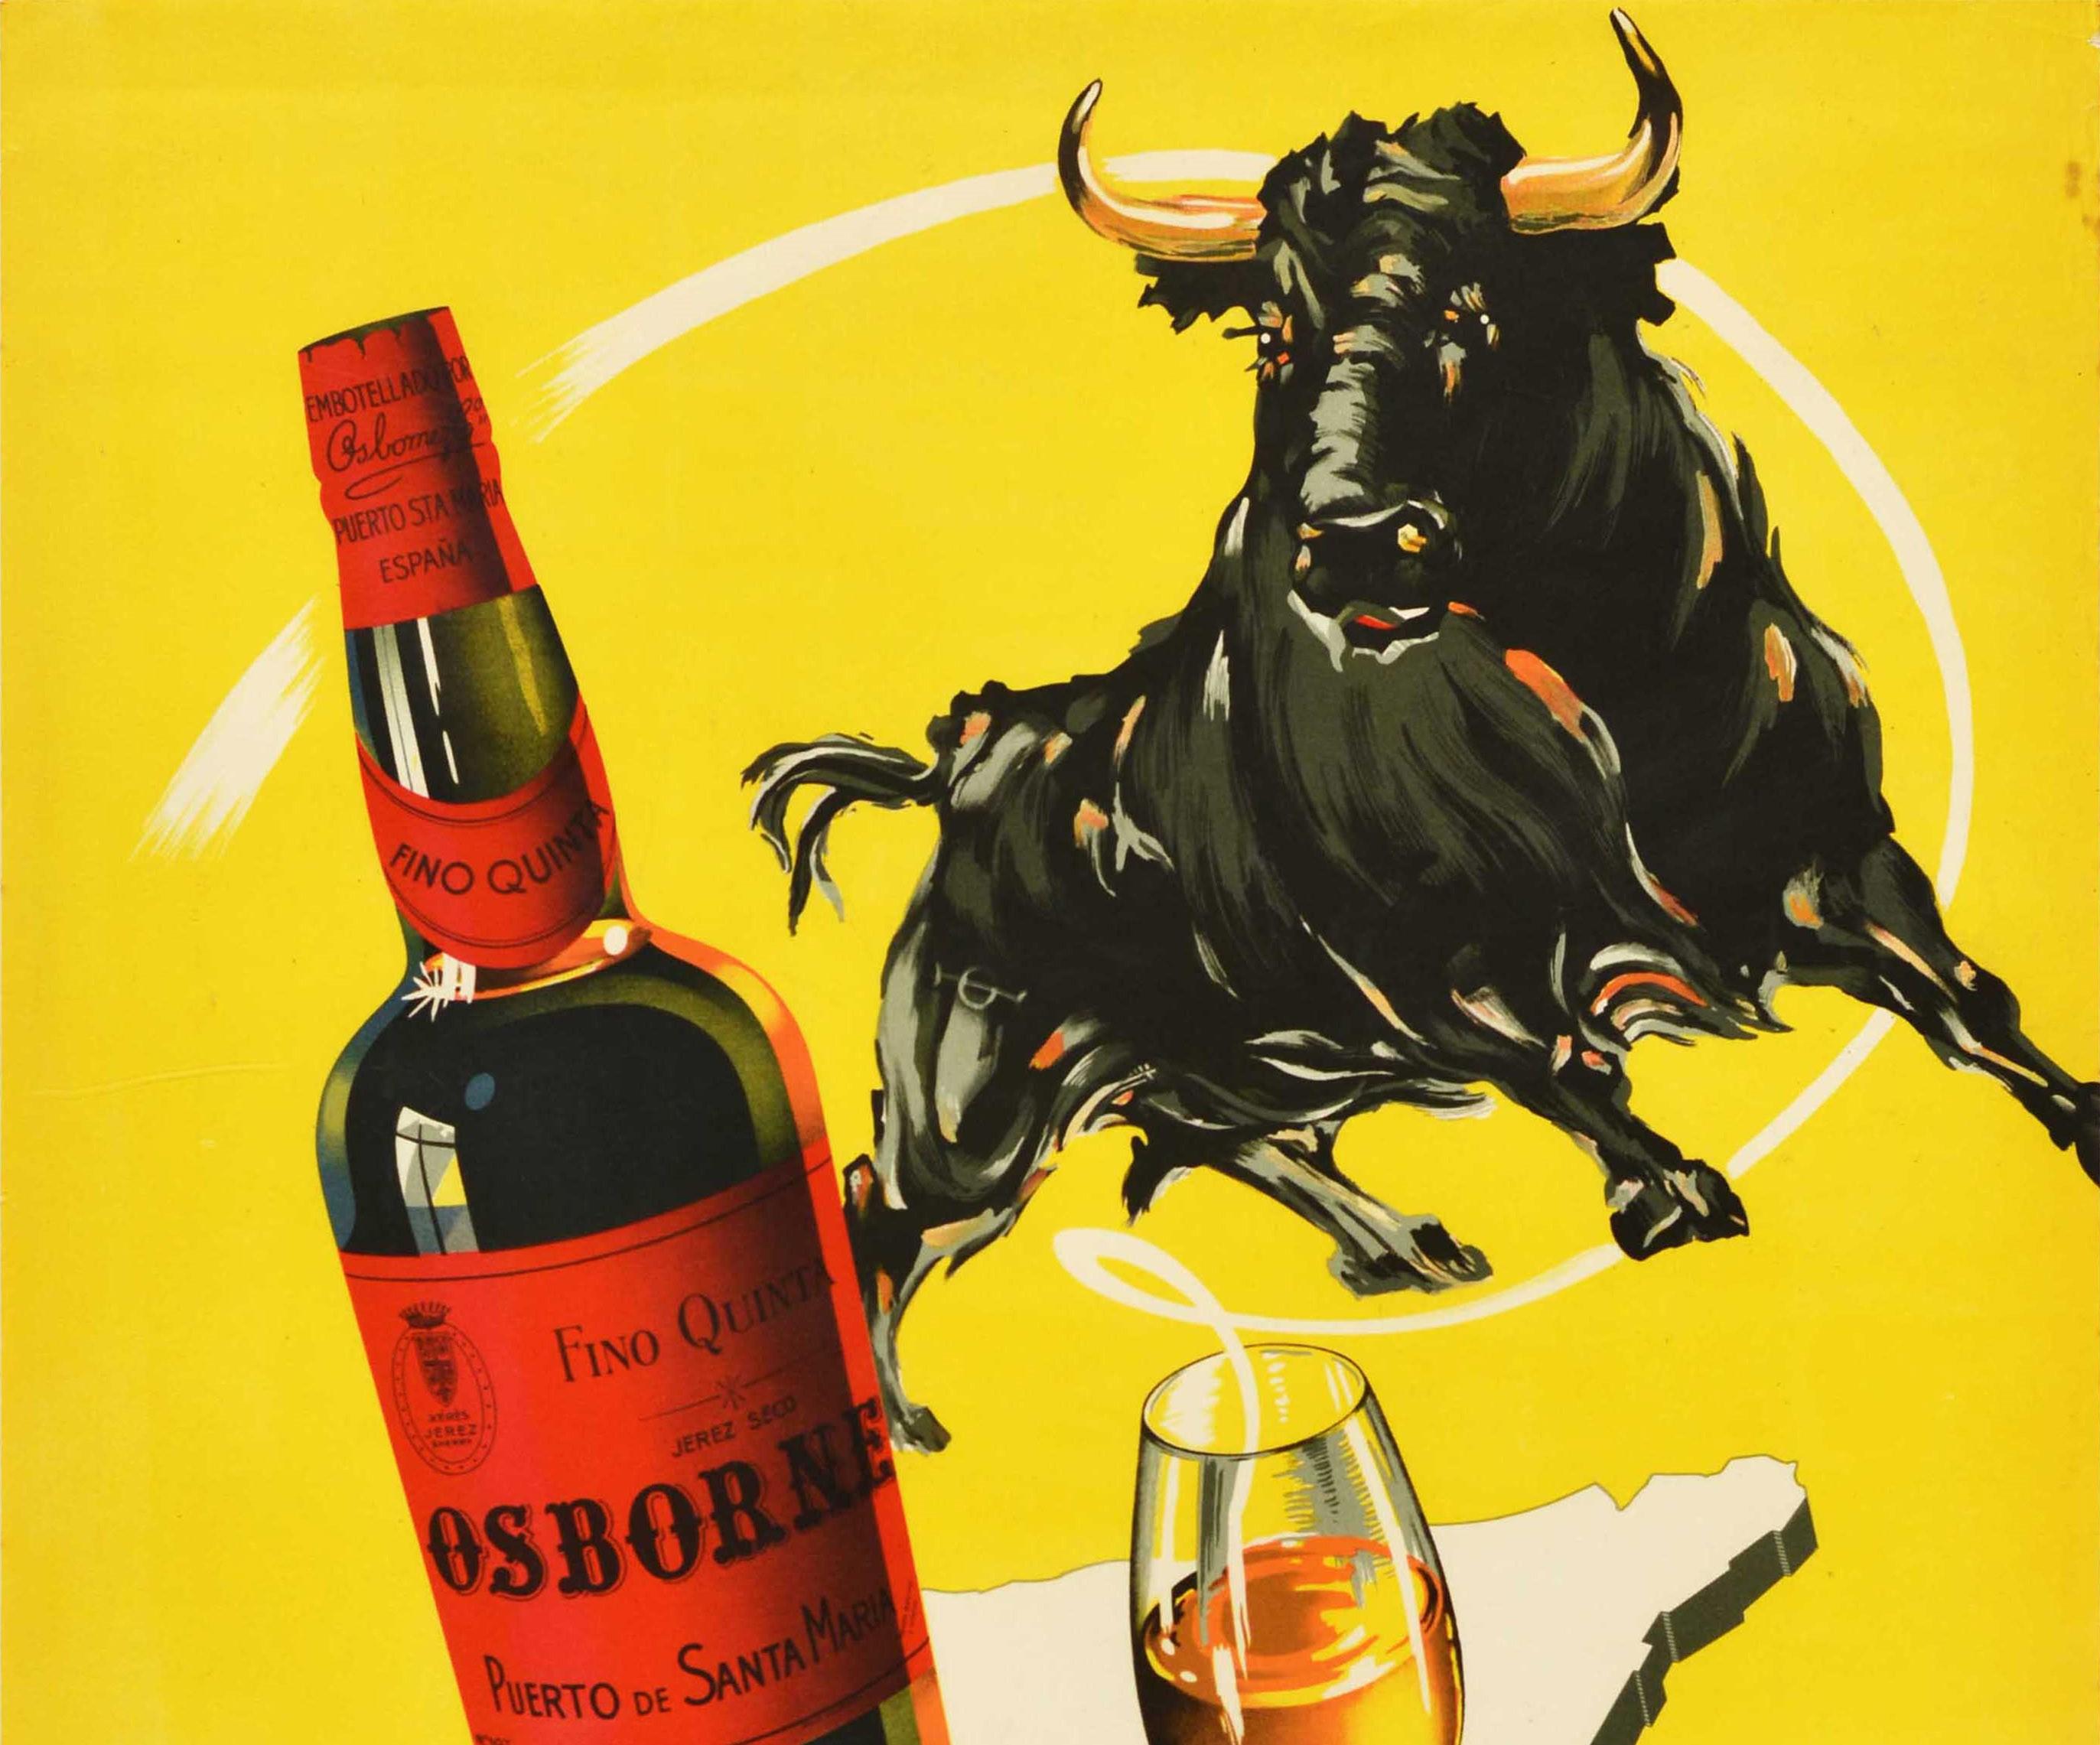 Original vintage drink advertising poster for Fino Quinta Osborne Puerto de Santa Maria Espana featuring a great design depicting a bull above a bottle of wine next to glass on an outline of the map of Spain with the title text in bold stylised